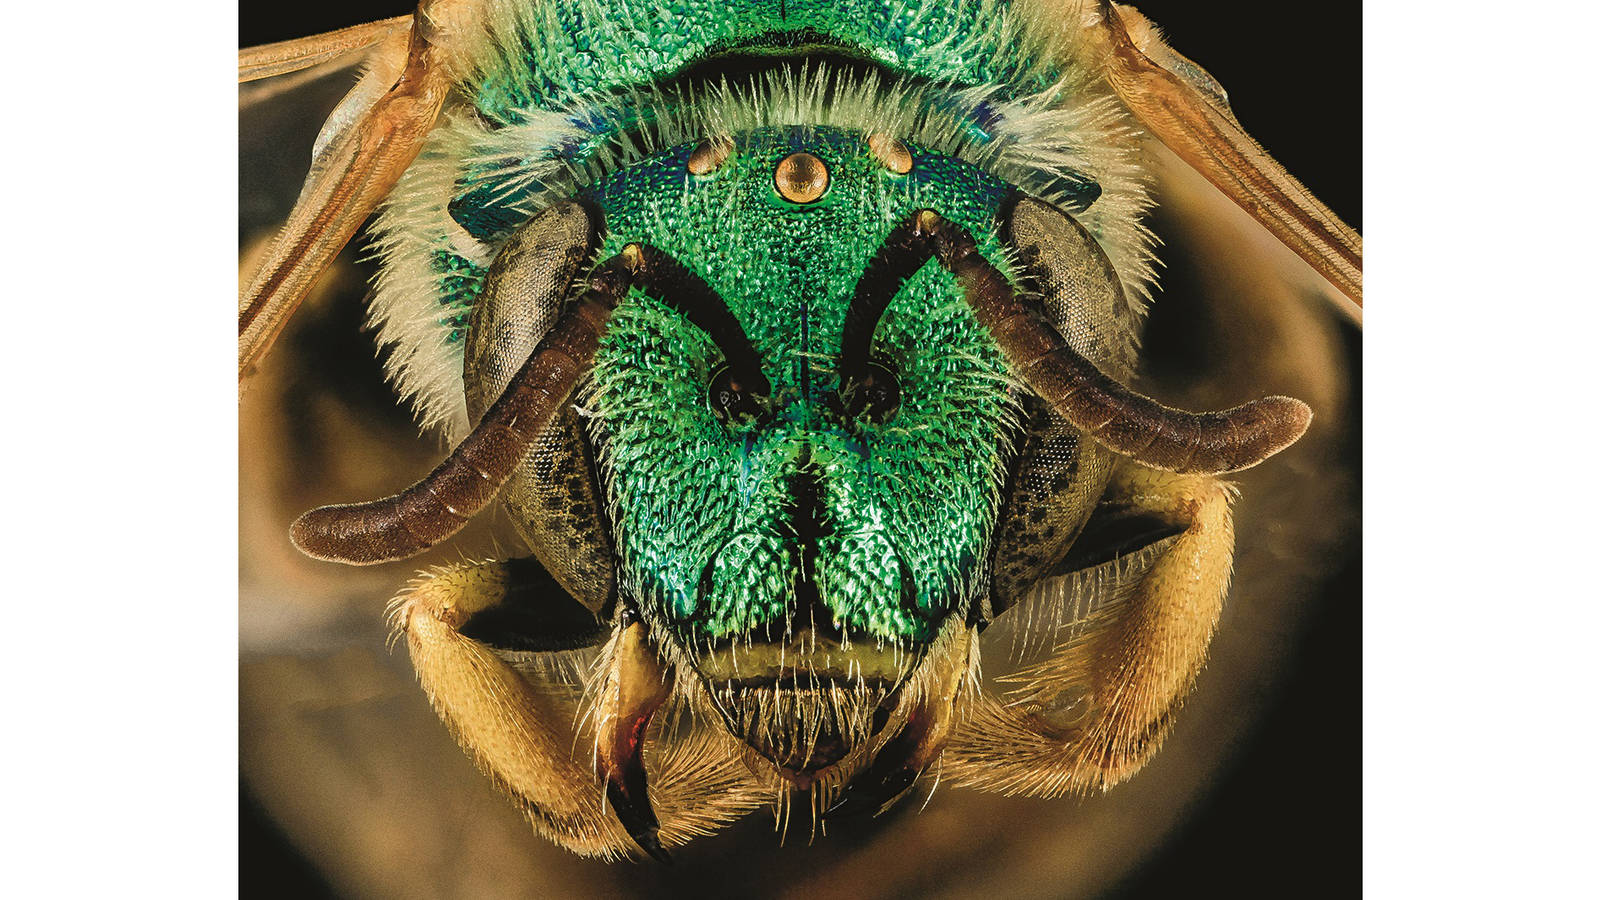 <h3 style="text-align: center; padding: 50px;"><span class="text-Intro-style"><em>Agapostemon melliventris</em> (bee), Badlands National Park, South Dakota. © SAM DROEGE/USGS BEE INVENTORY AND MONITORING LAB</span></h3>